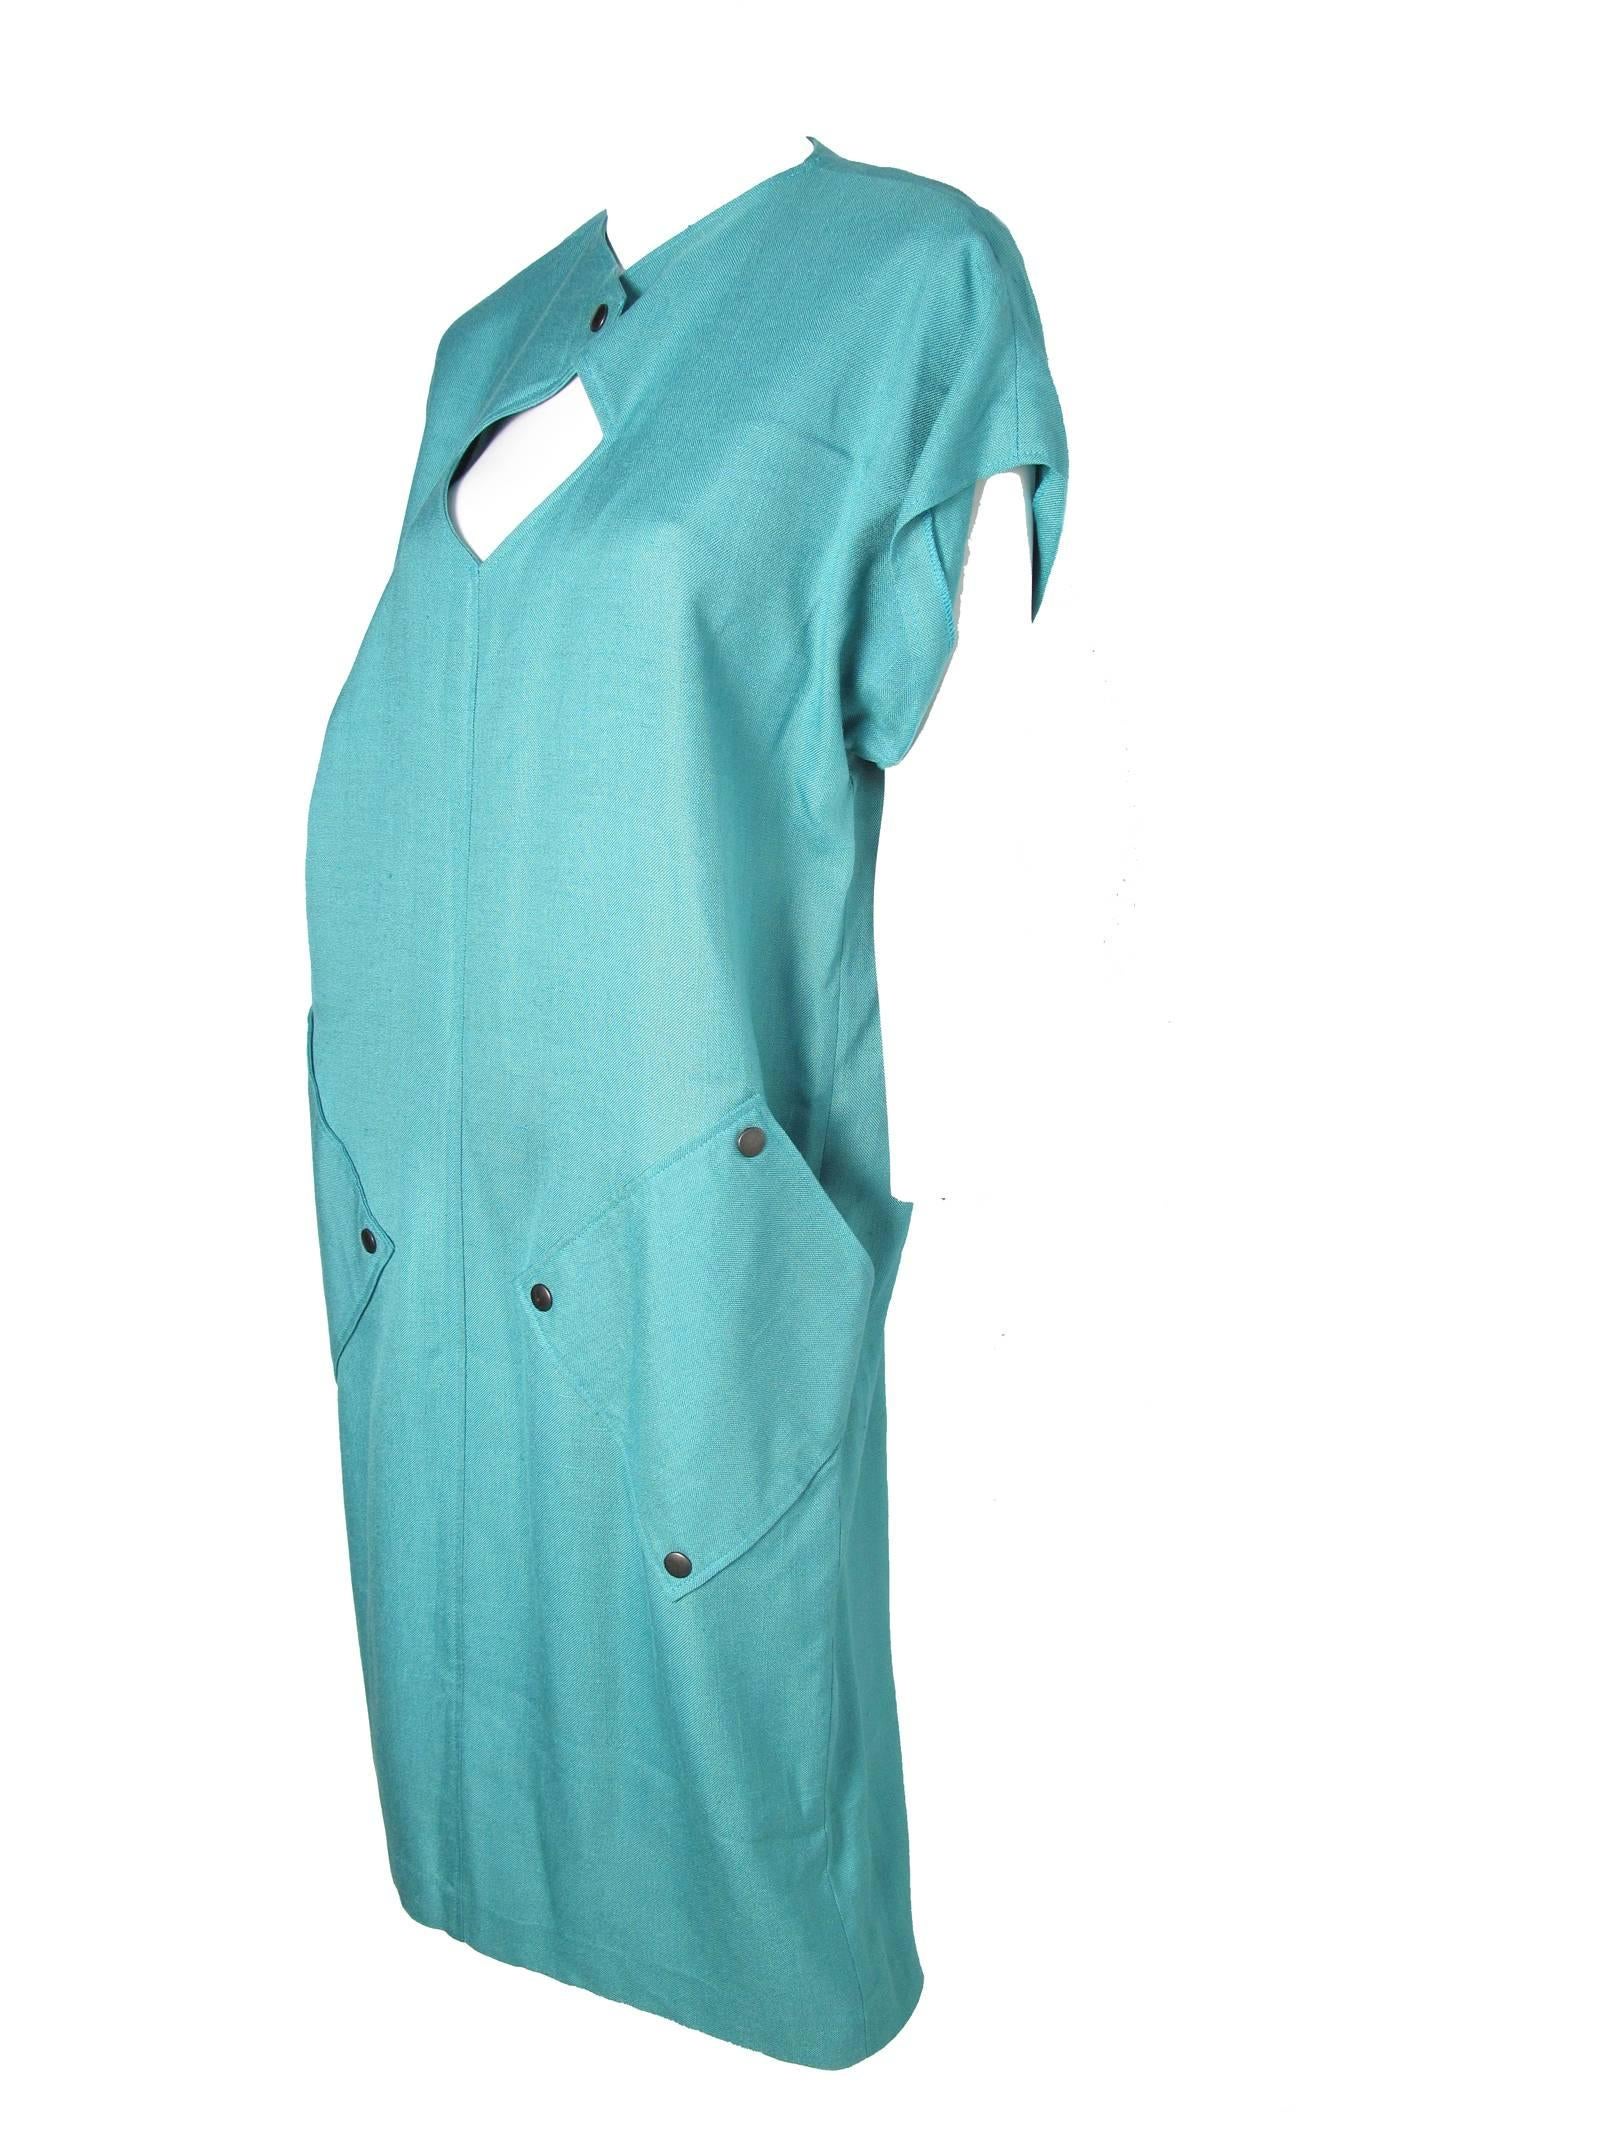 Oversized Pierre Cardin teal linen dress with large pockets.  Condition: Excellent. Size 46 / or Current US 8 - 10

We accept returns for refund, please see our terms.  We offer free ground shipping within the US.
